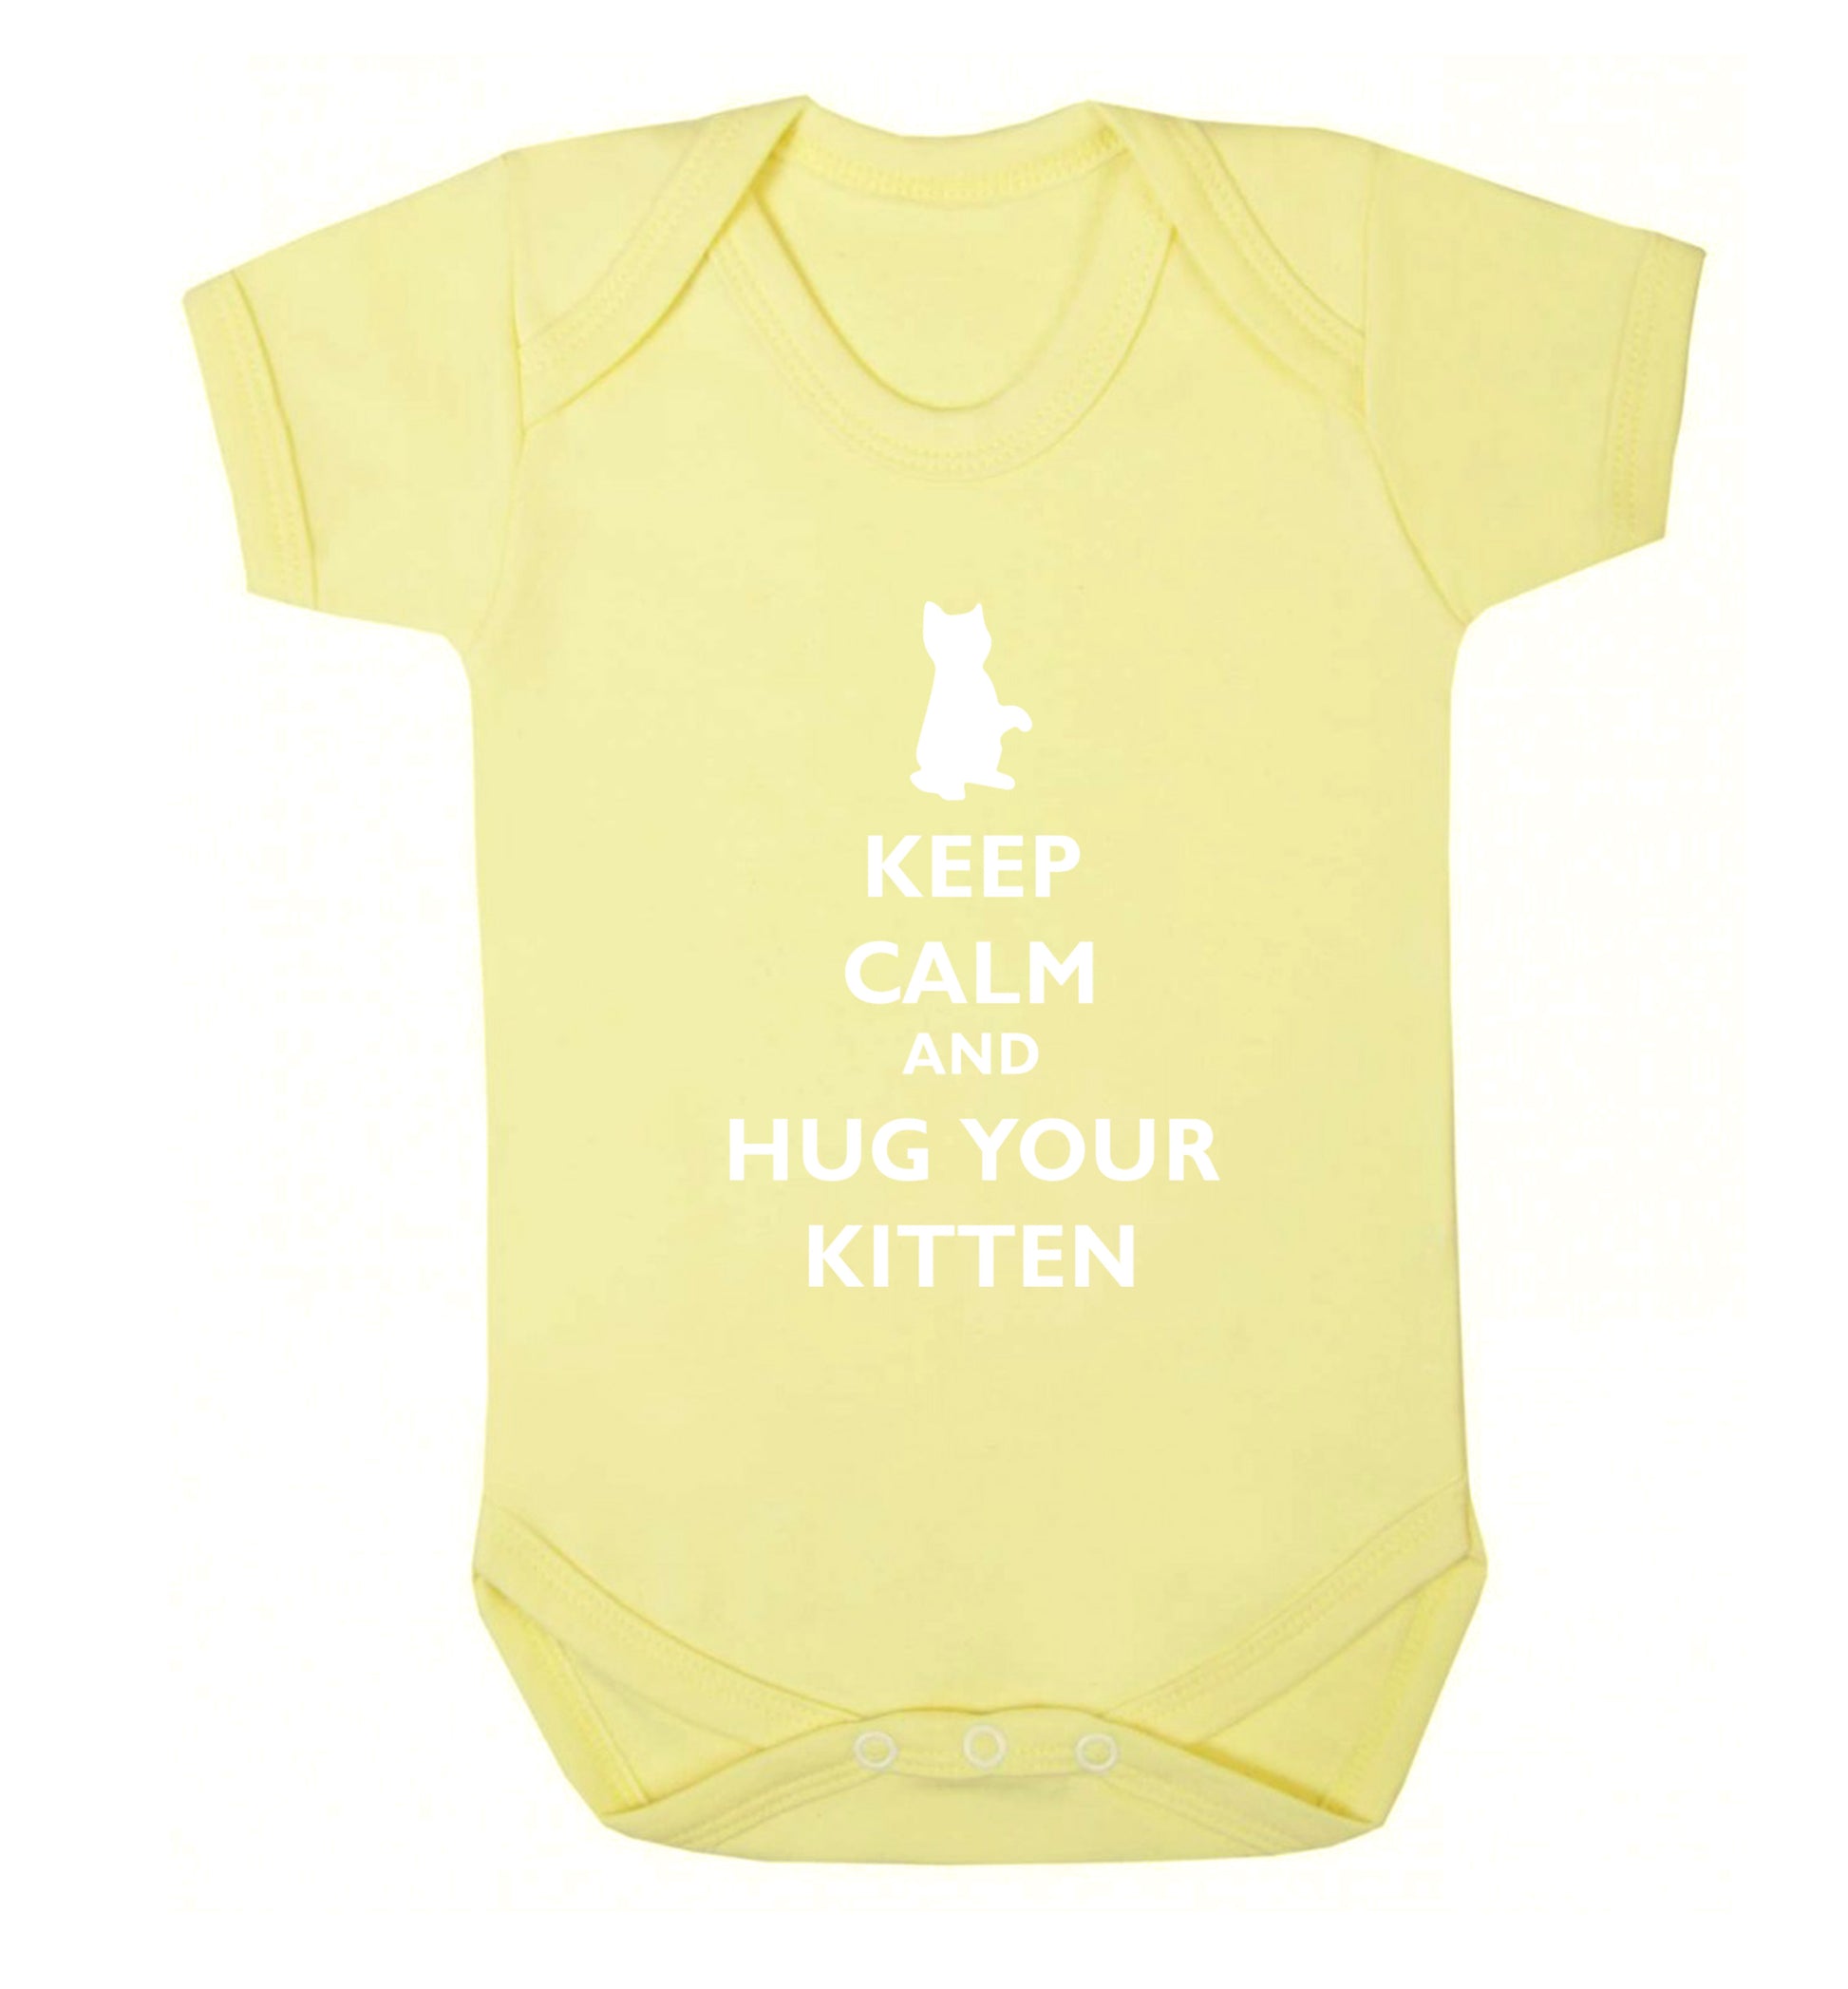 Keep calm and hug your kitten Baby Vest pale yellow 18-24 months